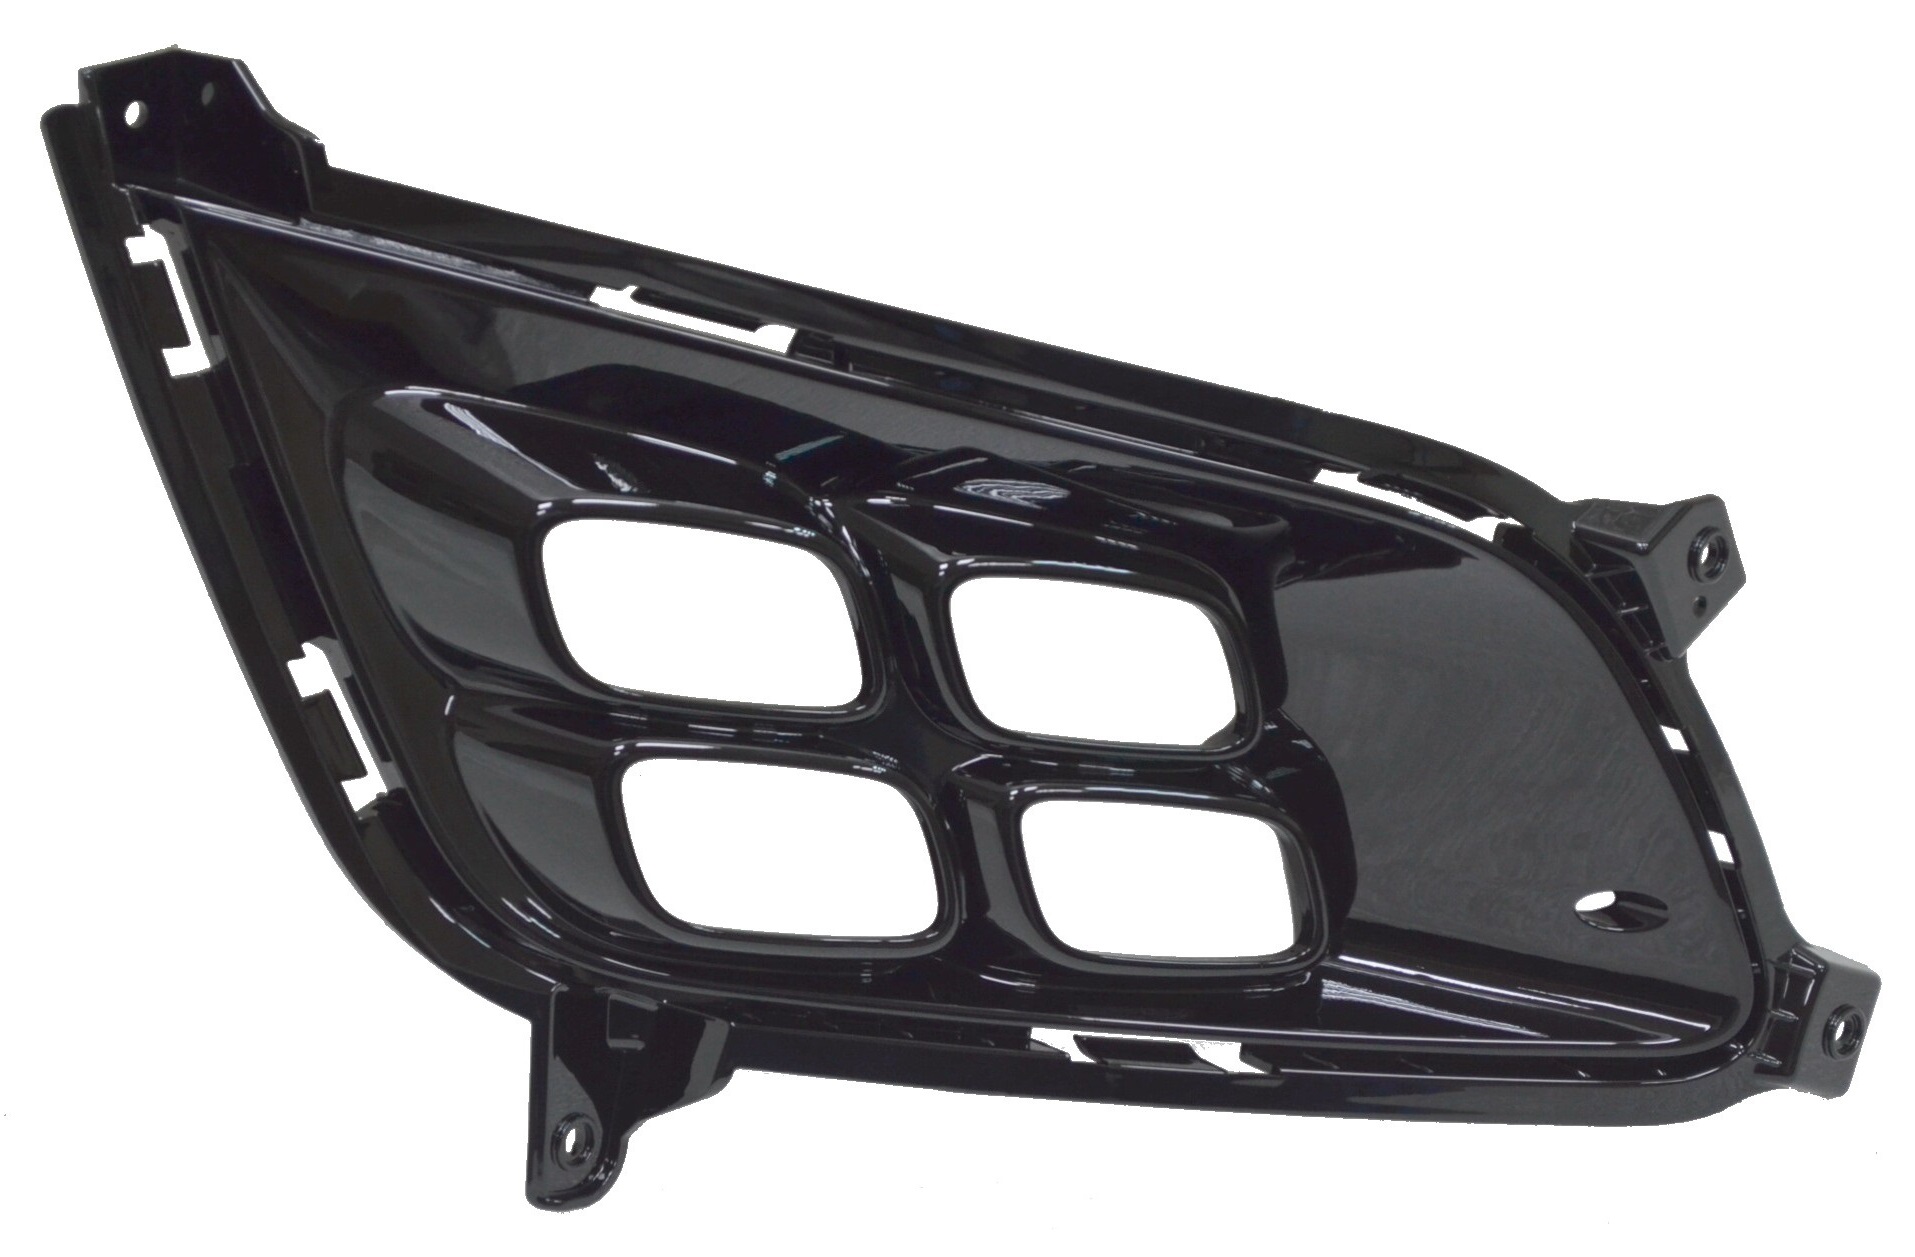 OPTIMA 14-15 Right FOG LAMP Cover With LED TYPE USA